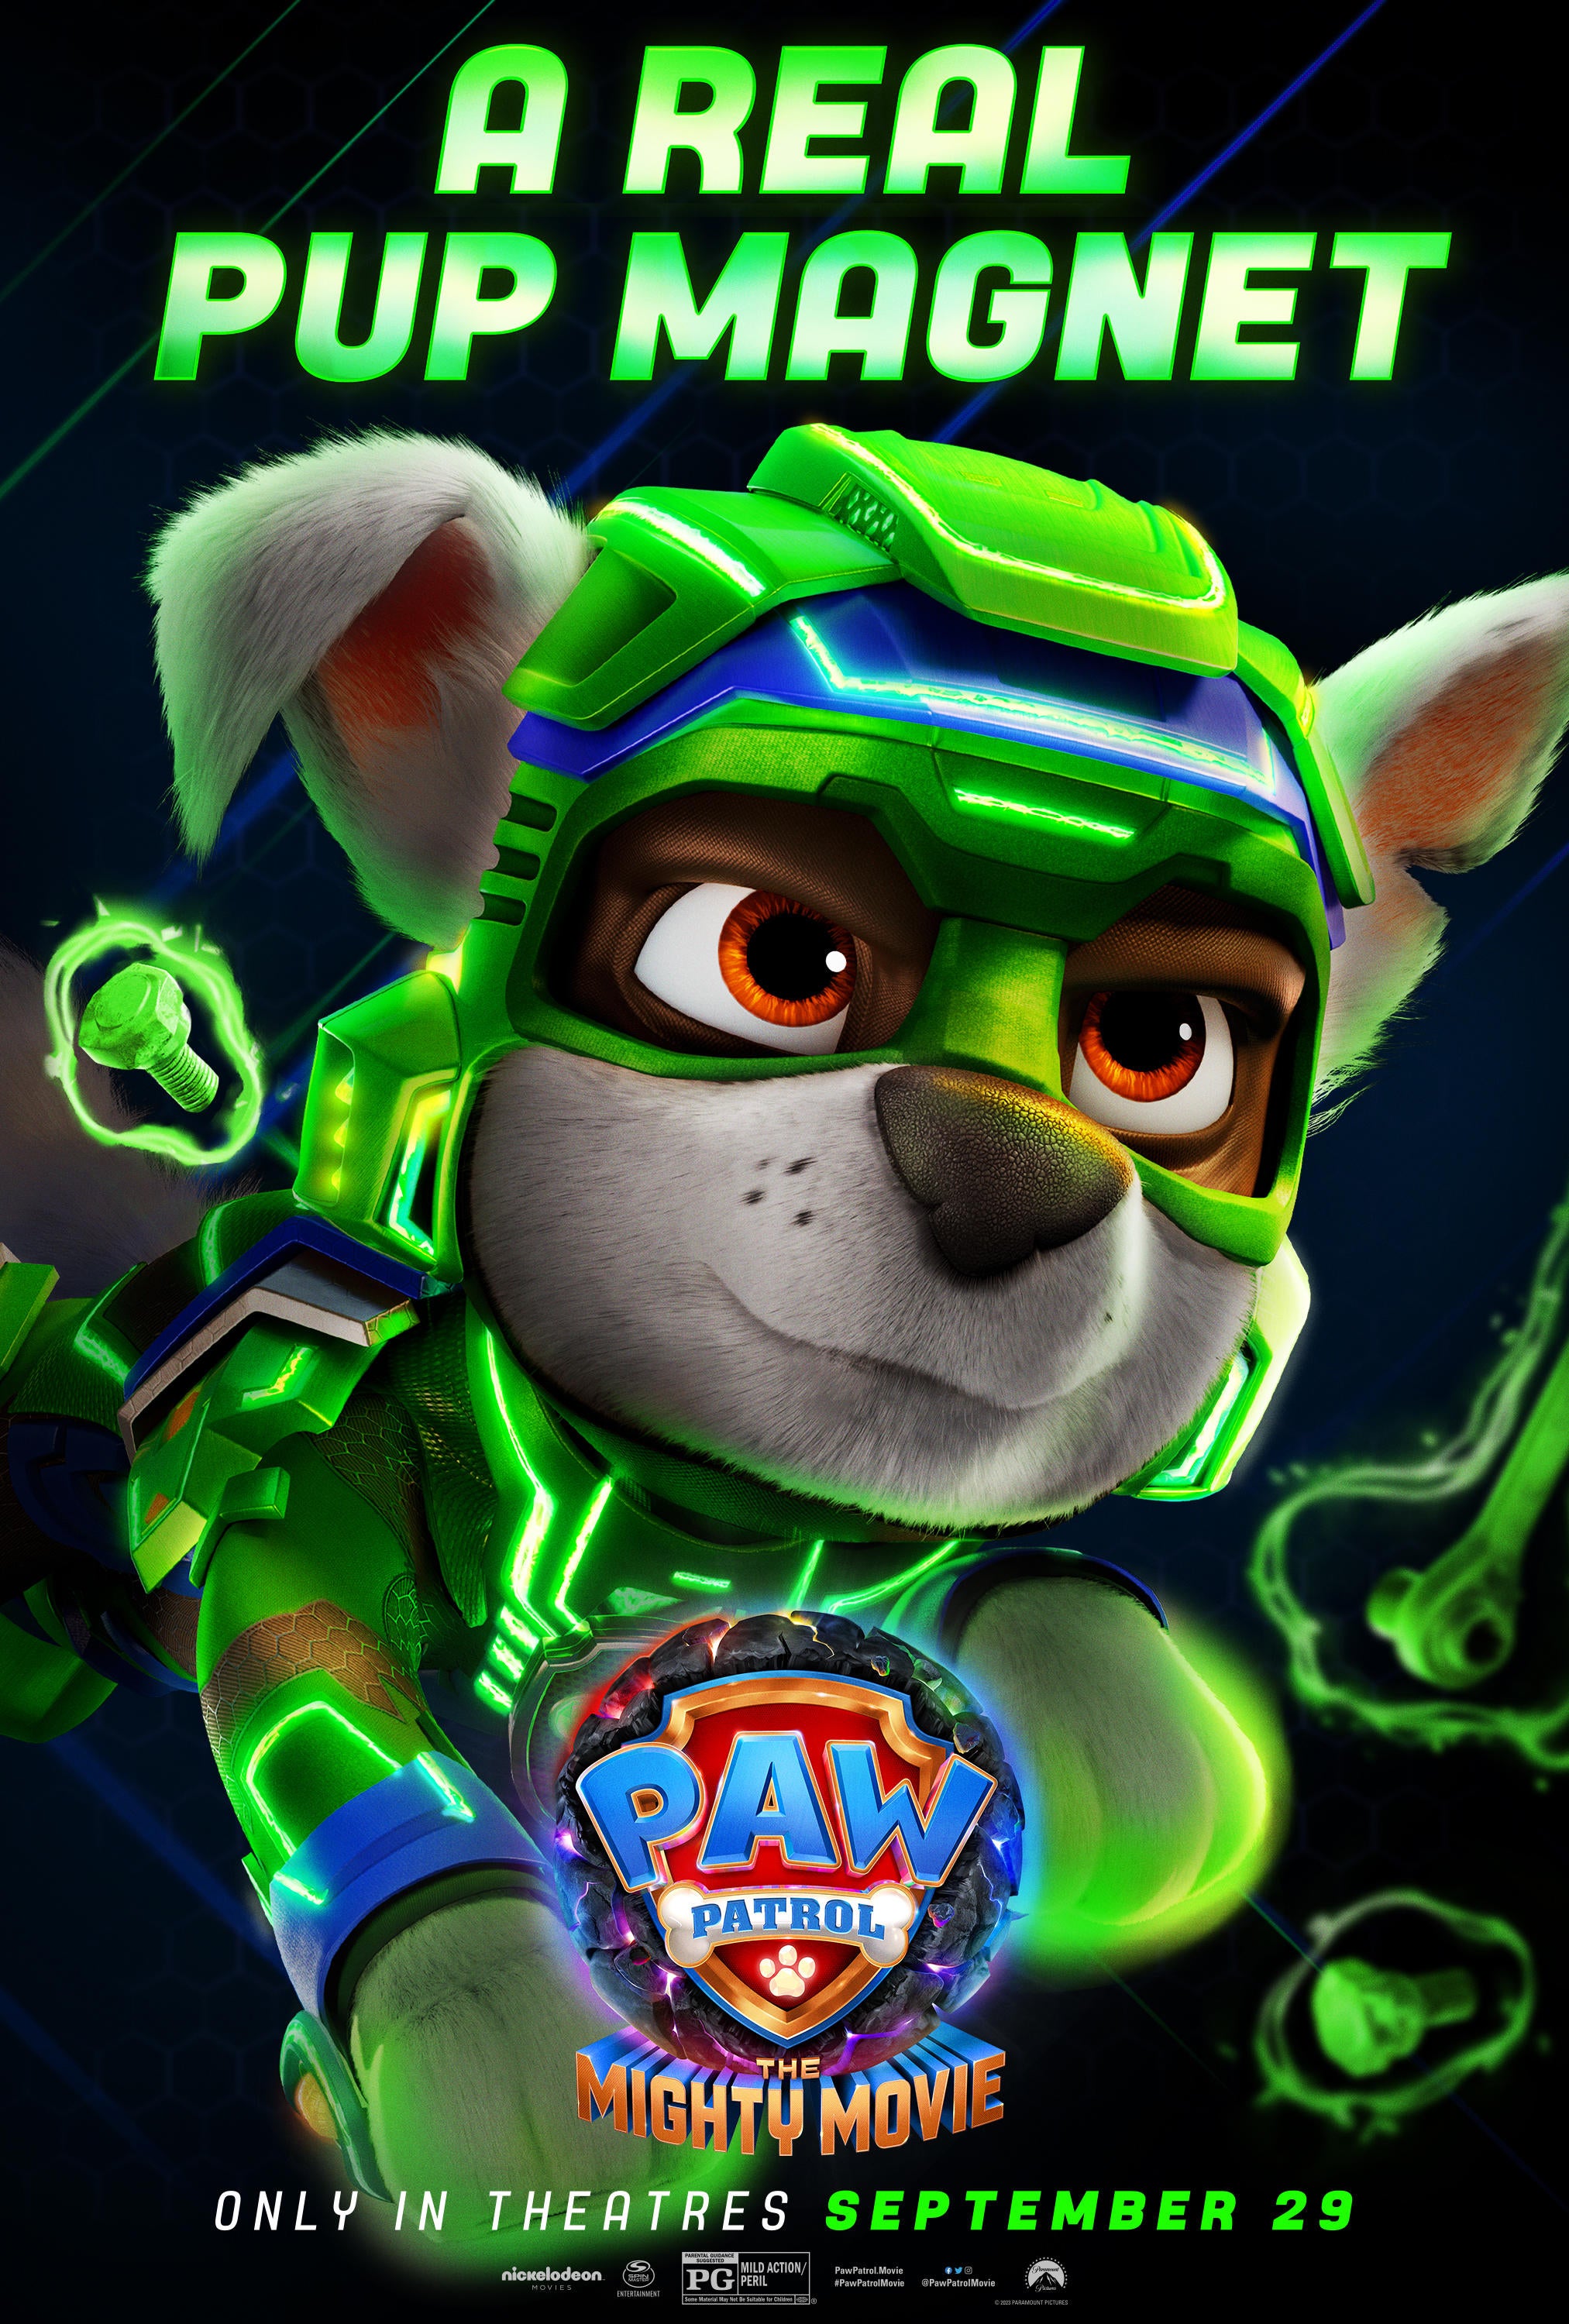 PAW Patrol: The Mighty Movie Character Posters: Rocky